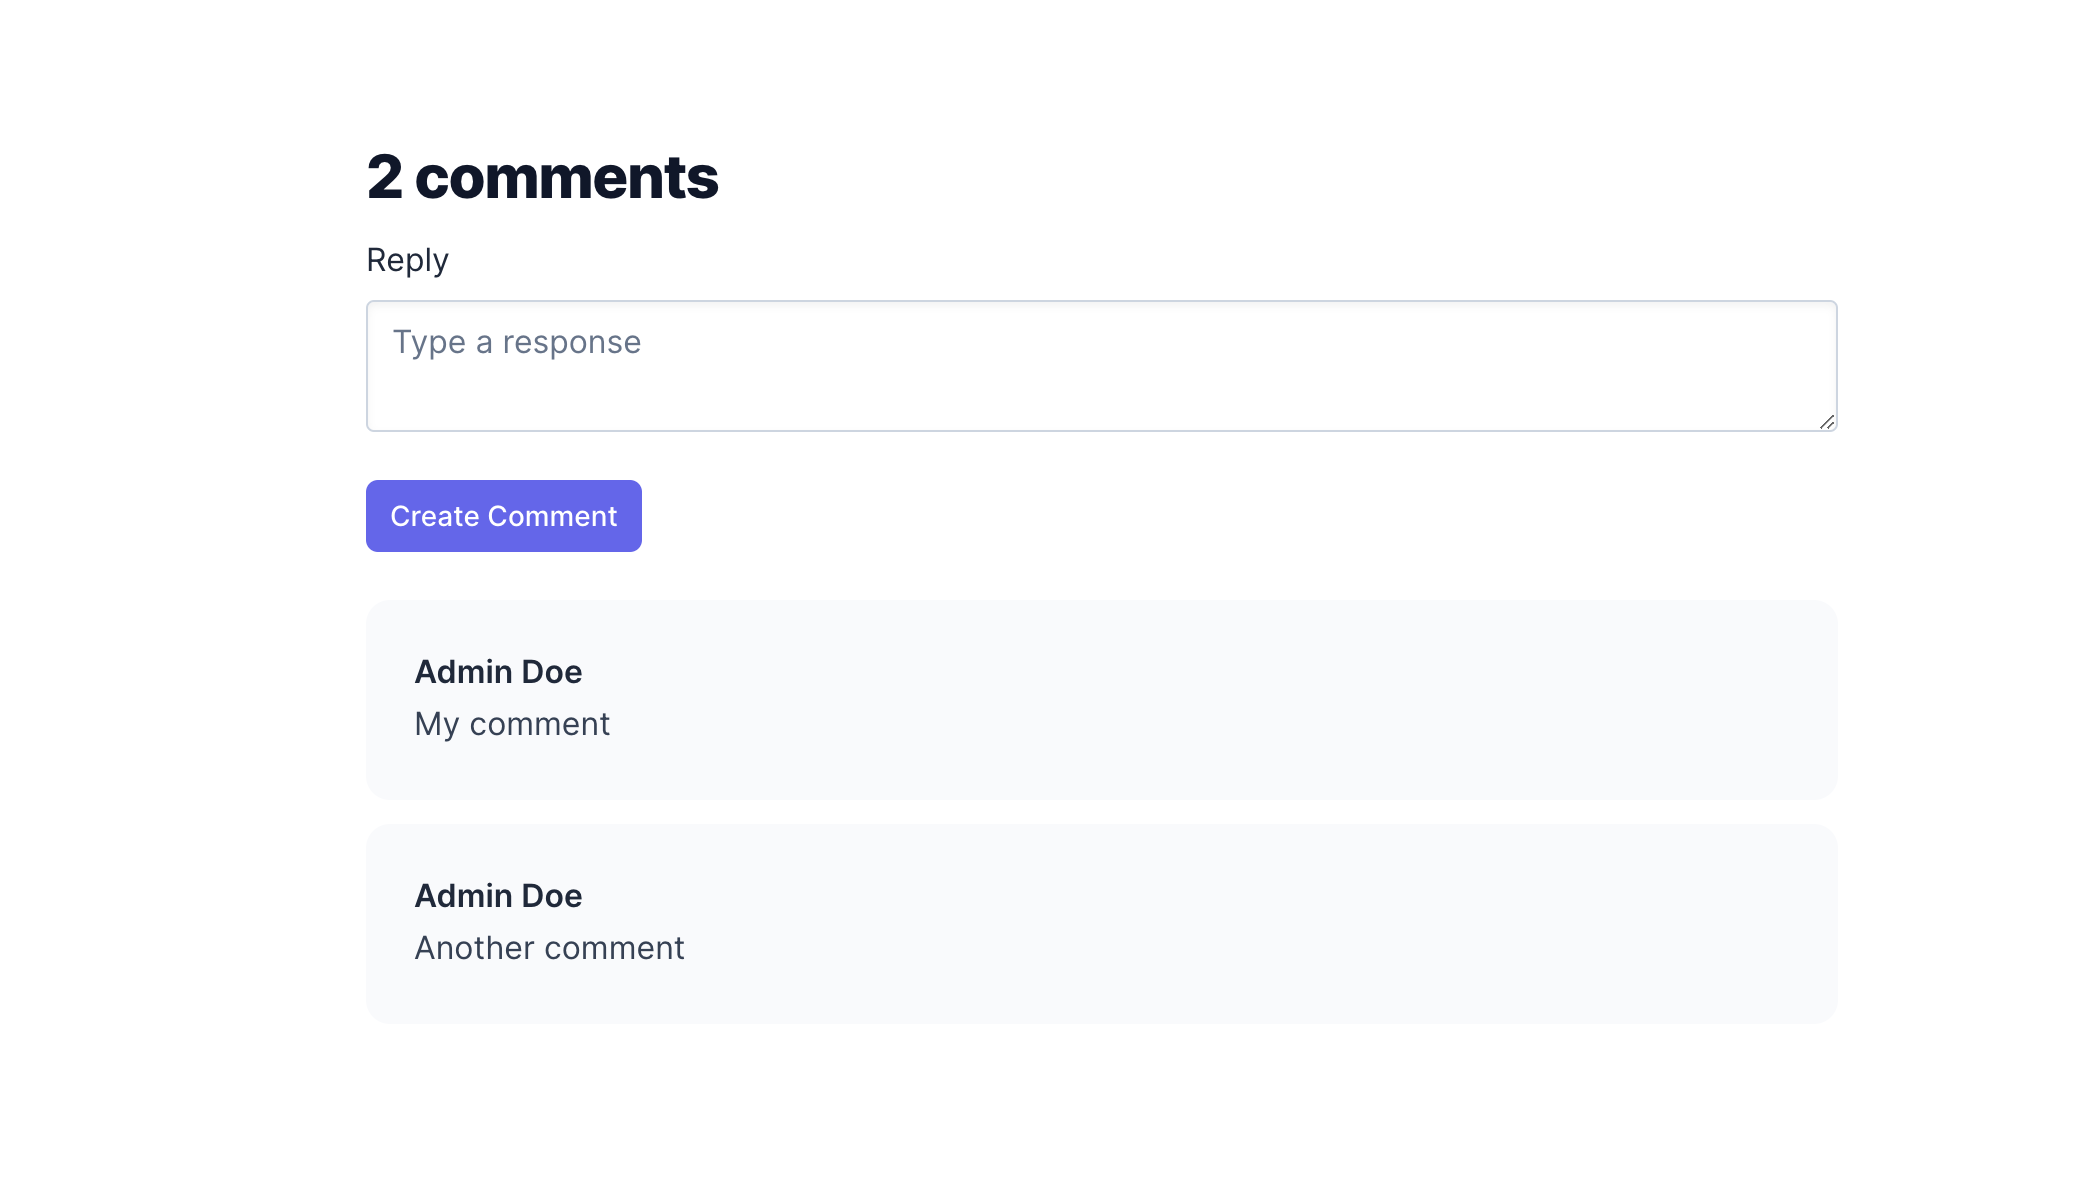 hotwire comments basic commenting UI screenshot